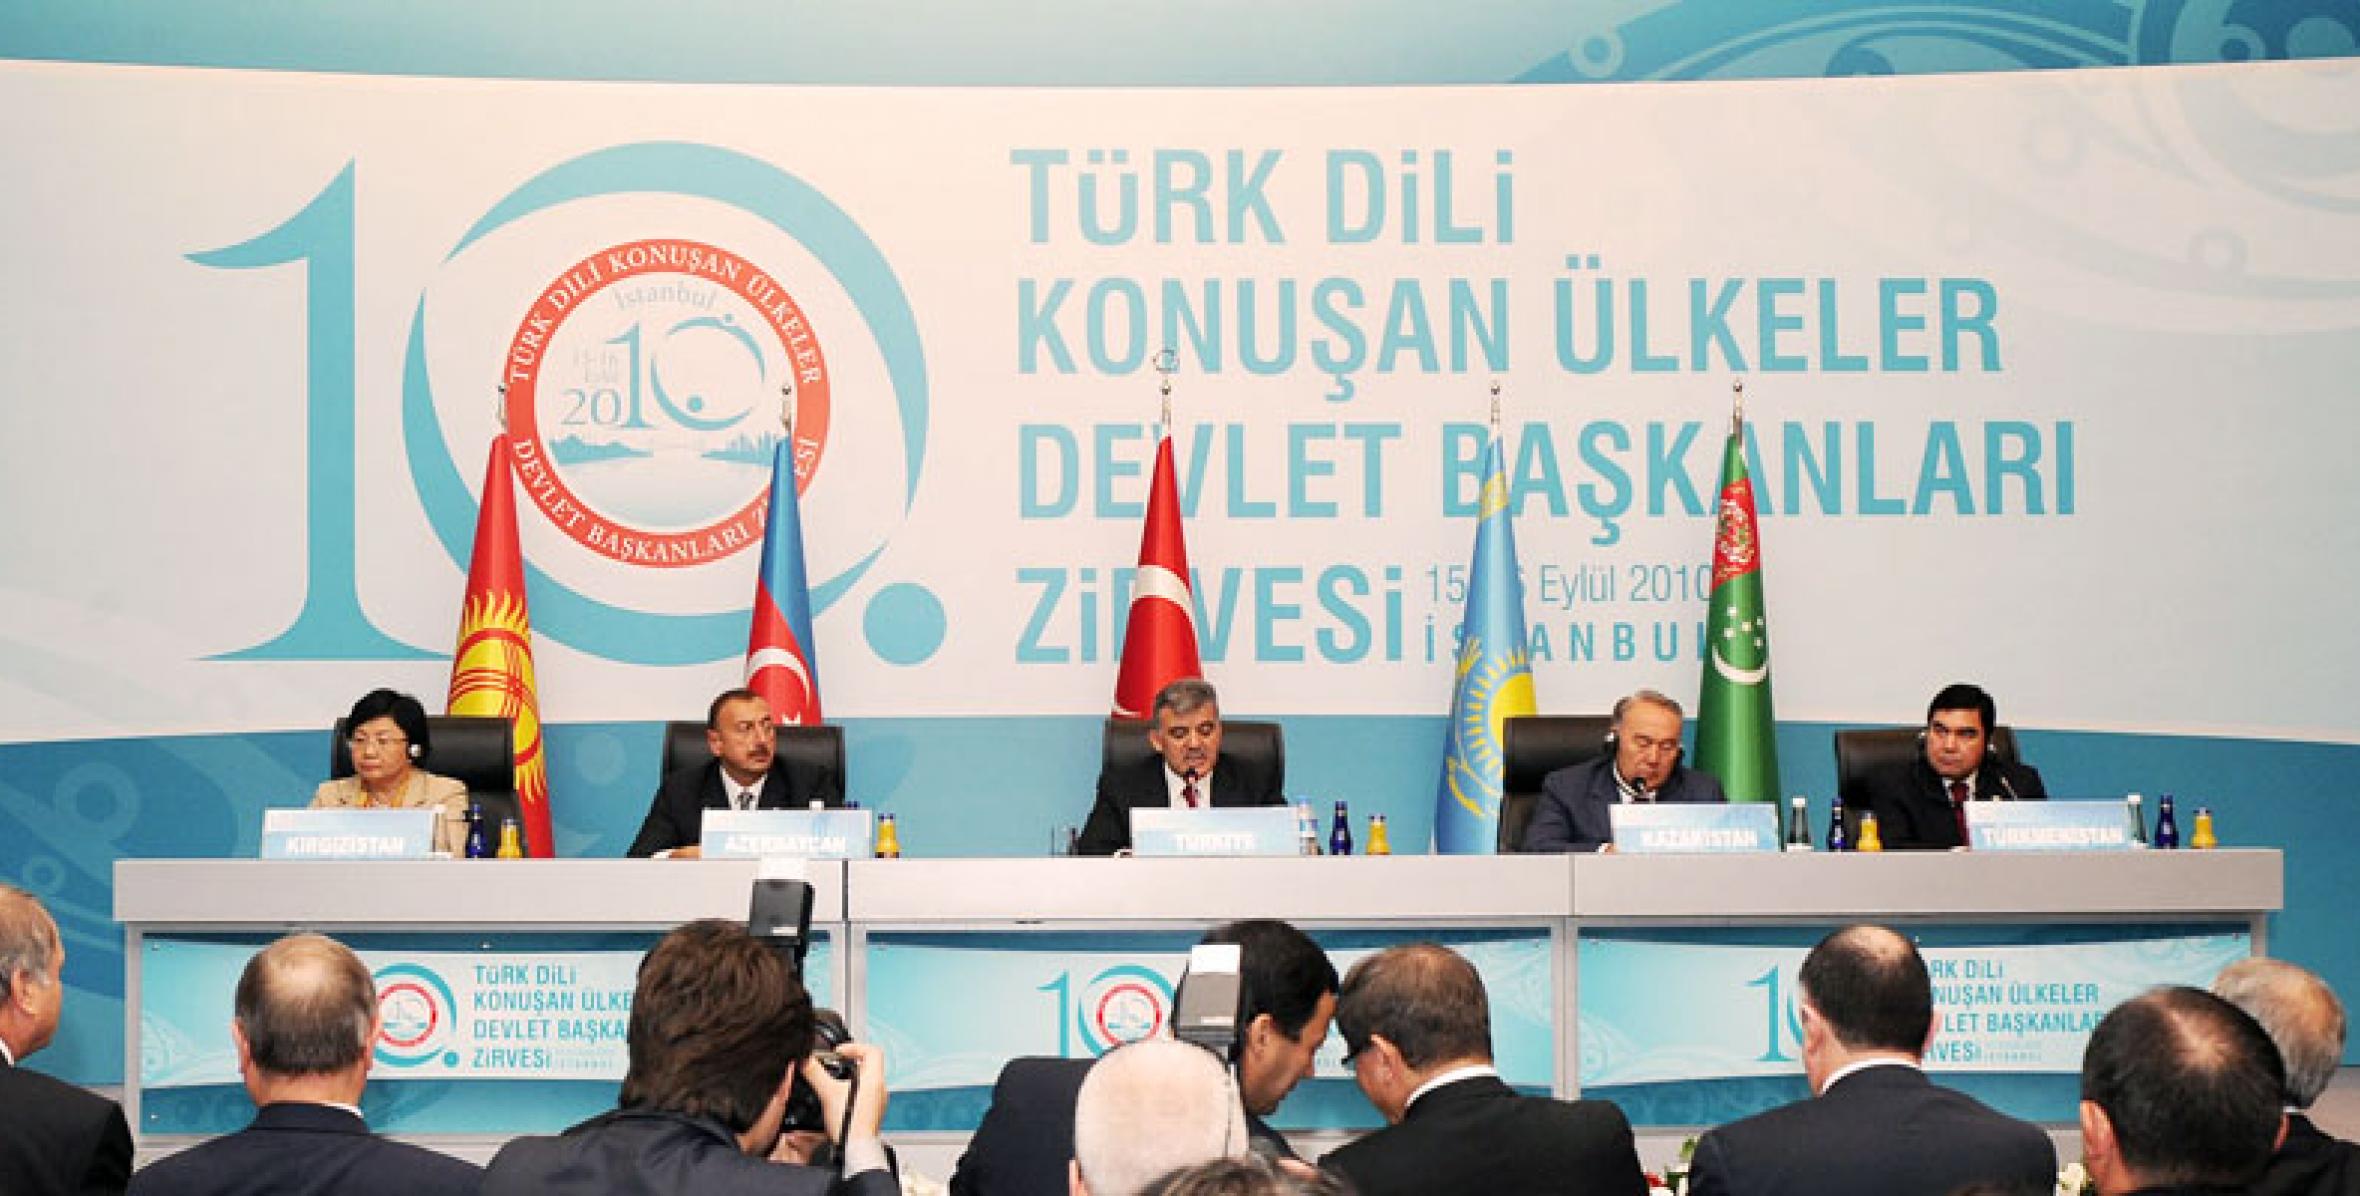 The Leaders of Turkic-speaking countries hold a joint press conference